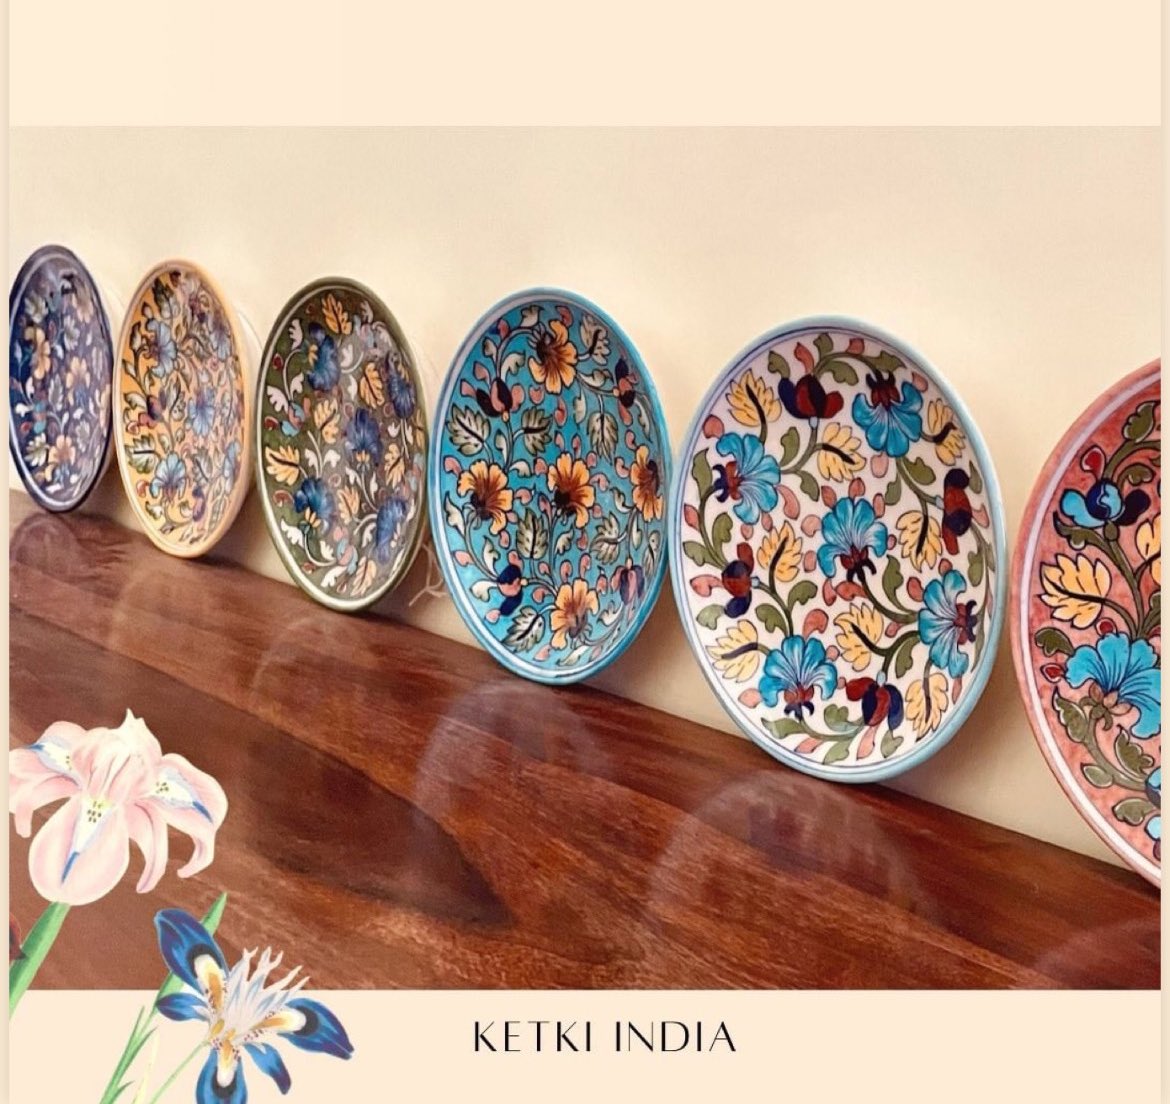 Love from Delhi ♥️

To buy these lovely handcrafted wall plates/for catalog, you can WhatsApp : wa.me/918890499678

Check out more collection here : Instagram: instagram.com/ketkiindia?utm…
 
#handcrafted #bluepottery #handpainted